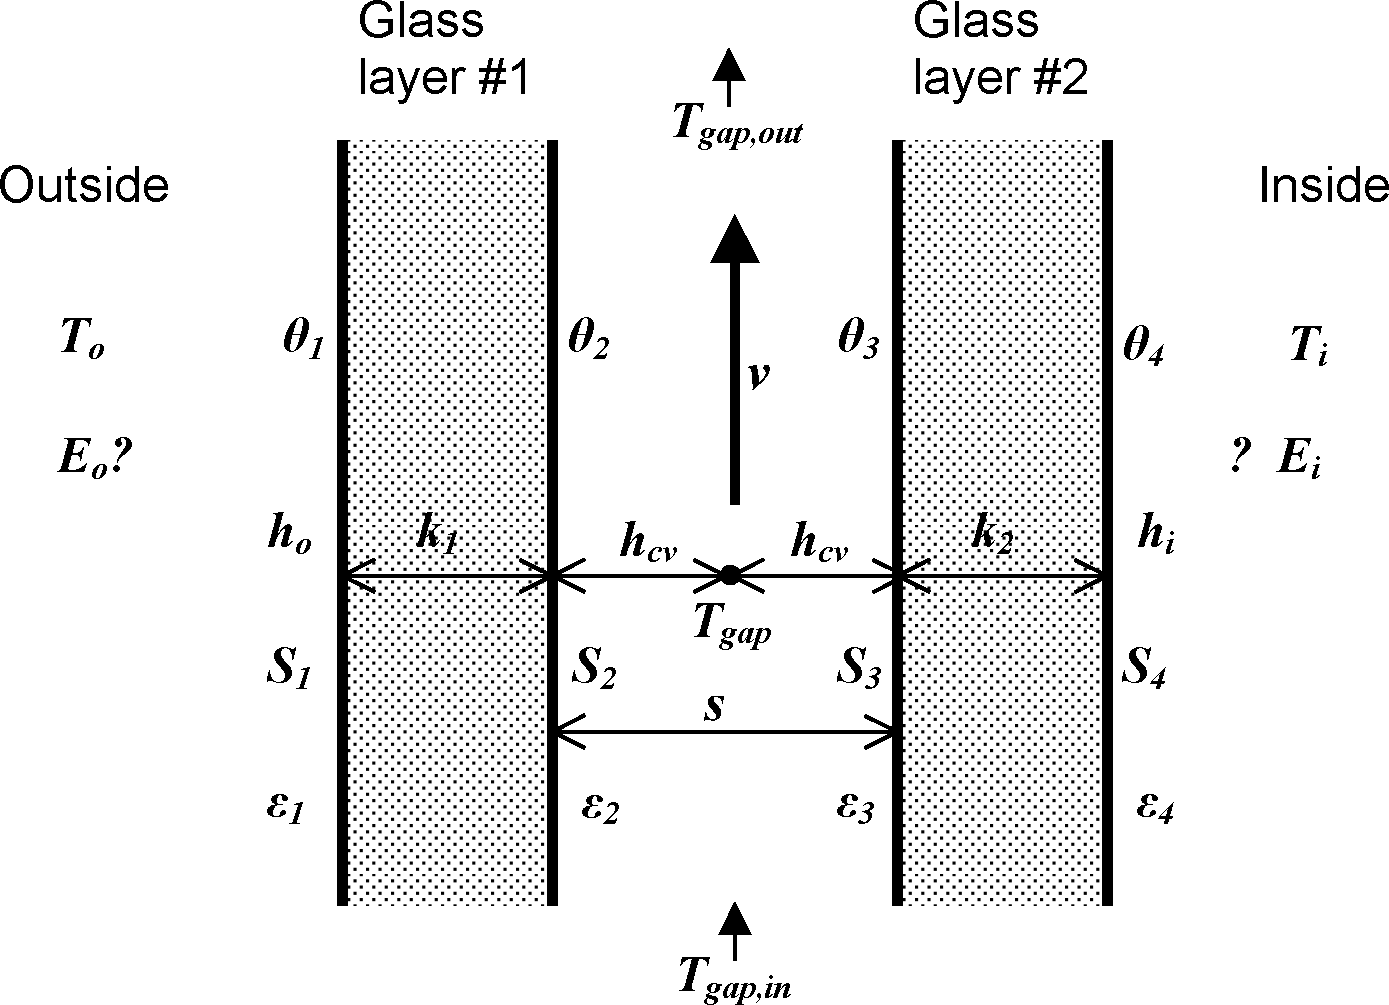 Glazing system with forced airflow between two glass layers showing variables used in the heat balance equations.